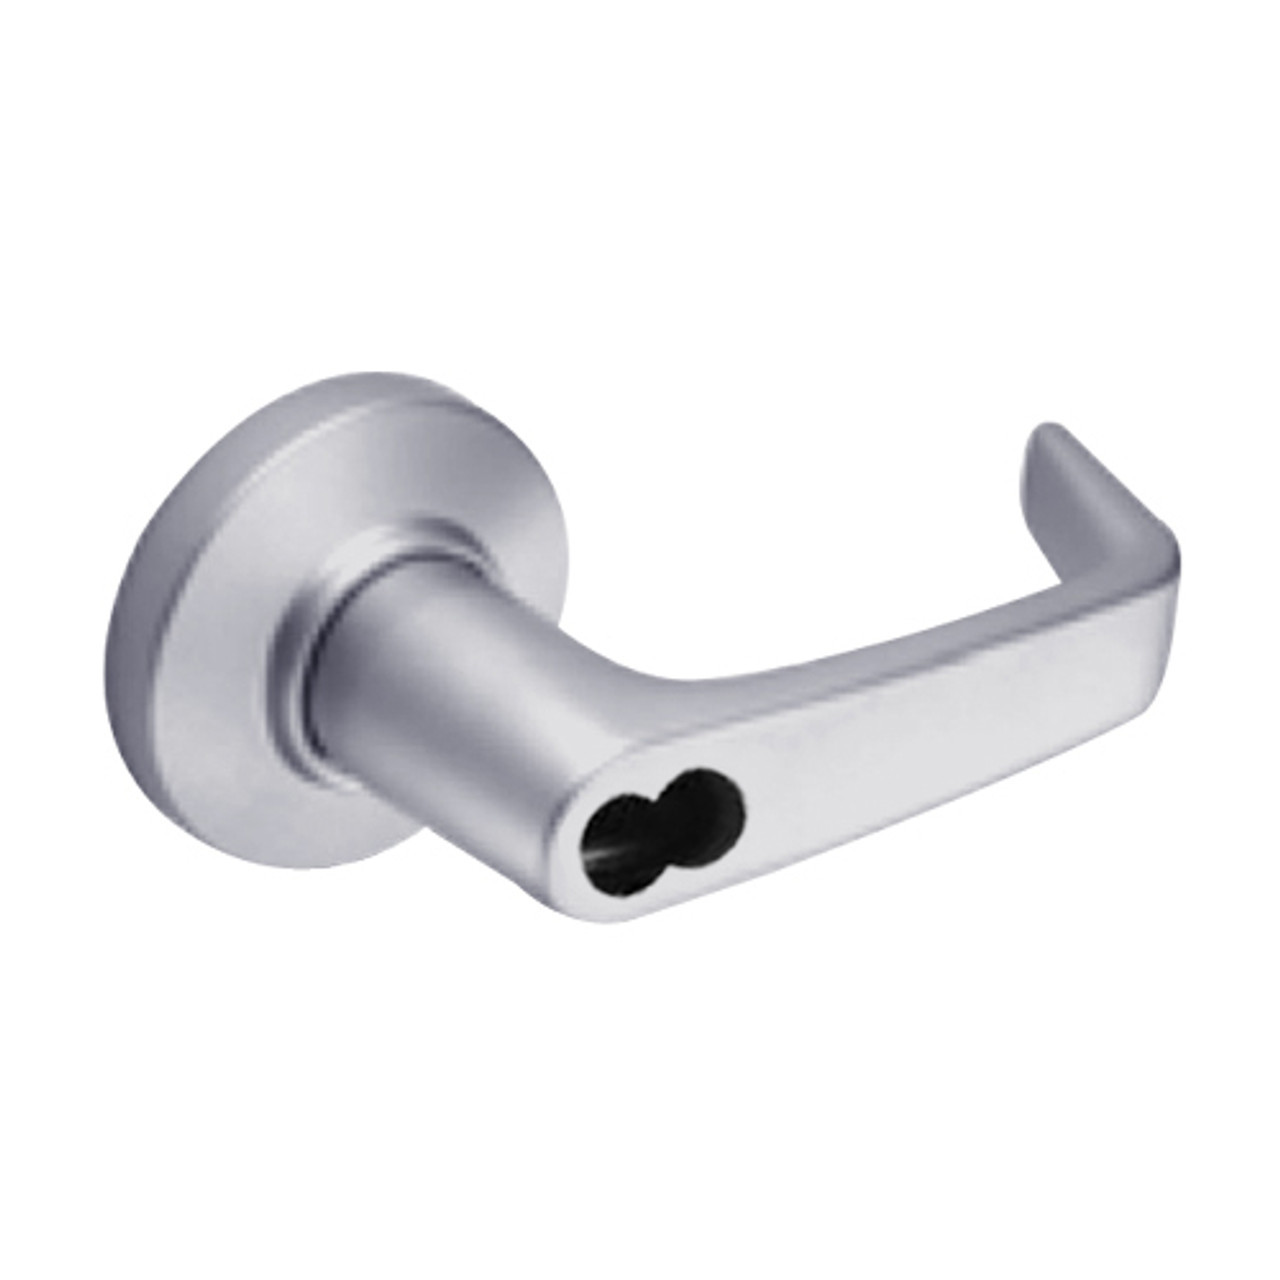 9K37A15CSTK626LM Best 9K Series Dormitory or Storeroom Cylindrical Lever Locks with Contour Angle with Return Lever Design Accept 7 Pin Best Core in Satin Chrome